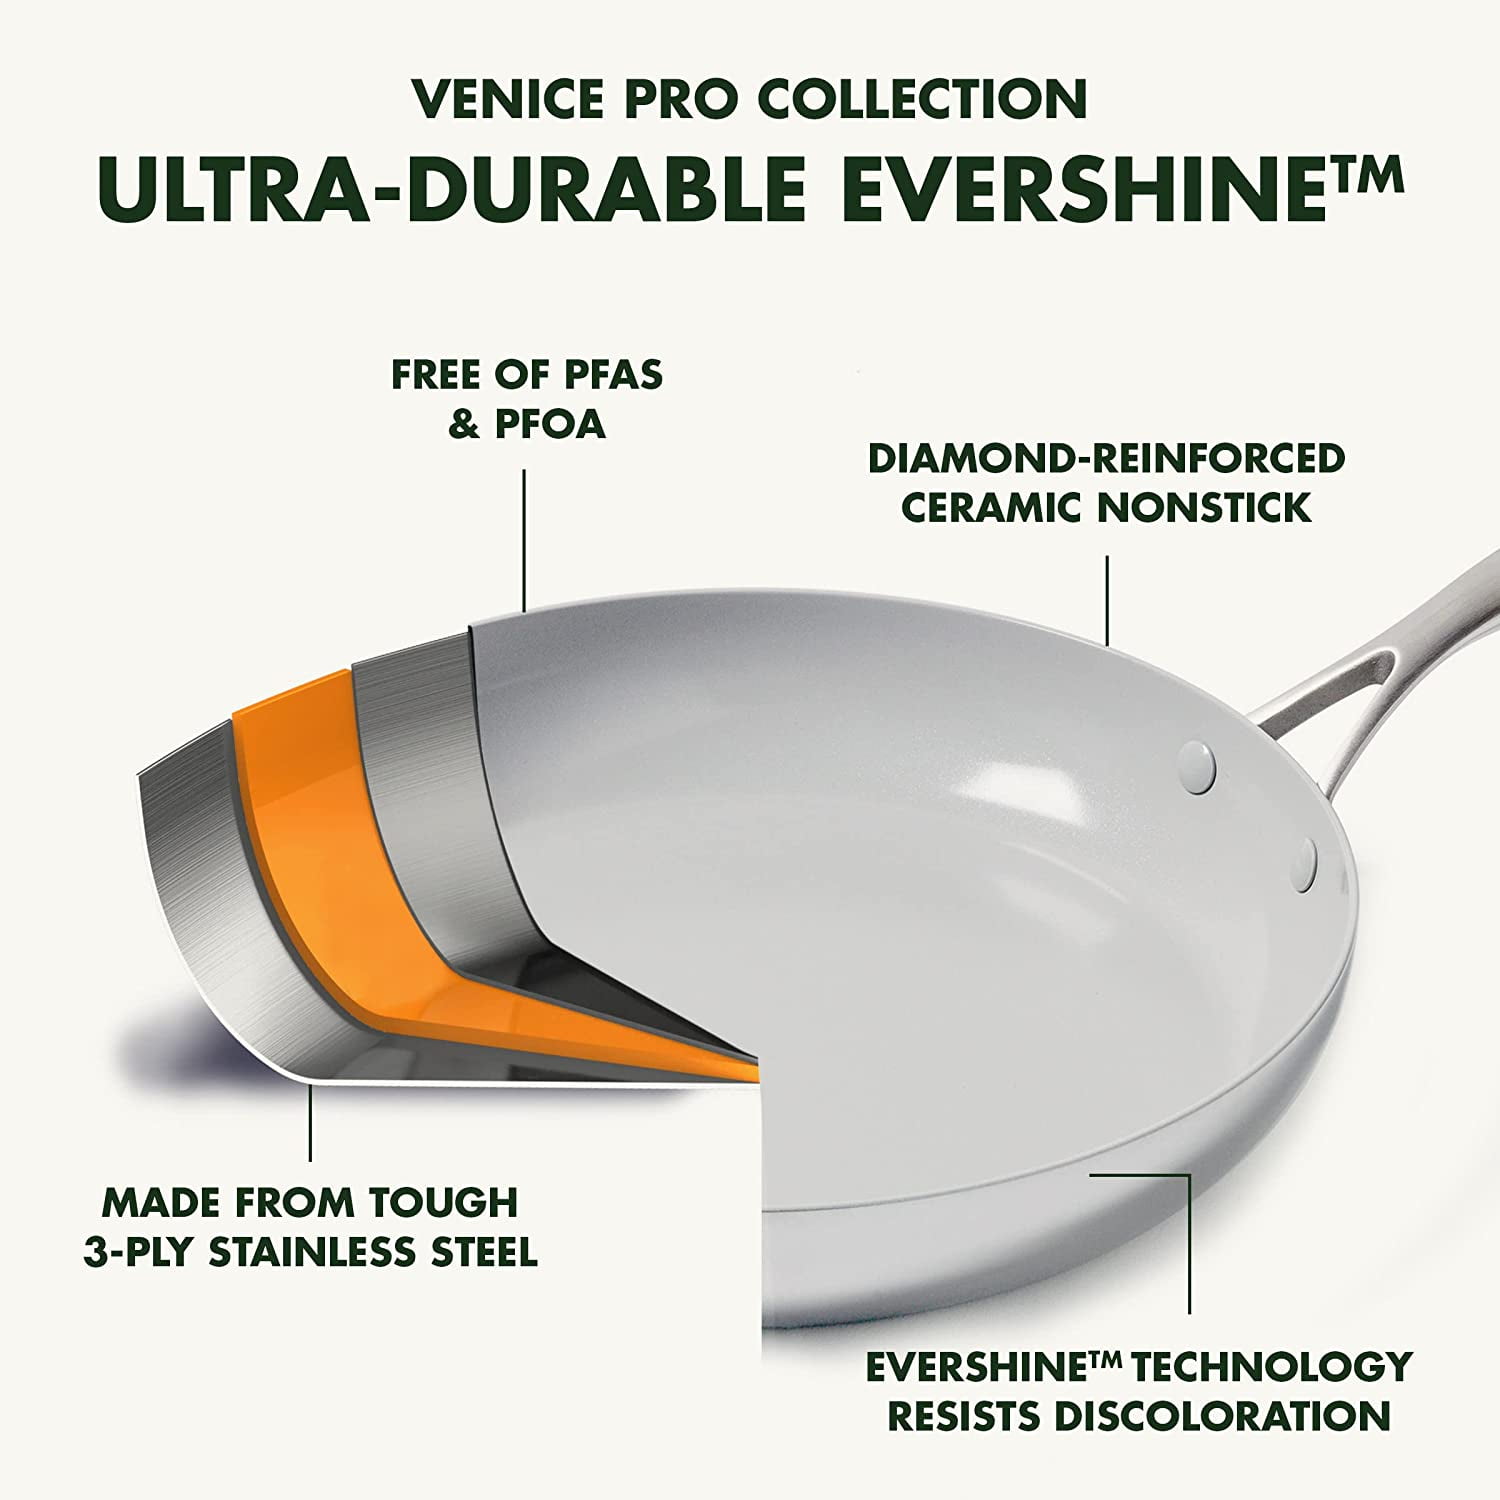 GreenPan Venice Pro Tri-Ply Stainless Steel Healthy Ceramic